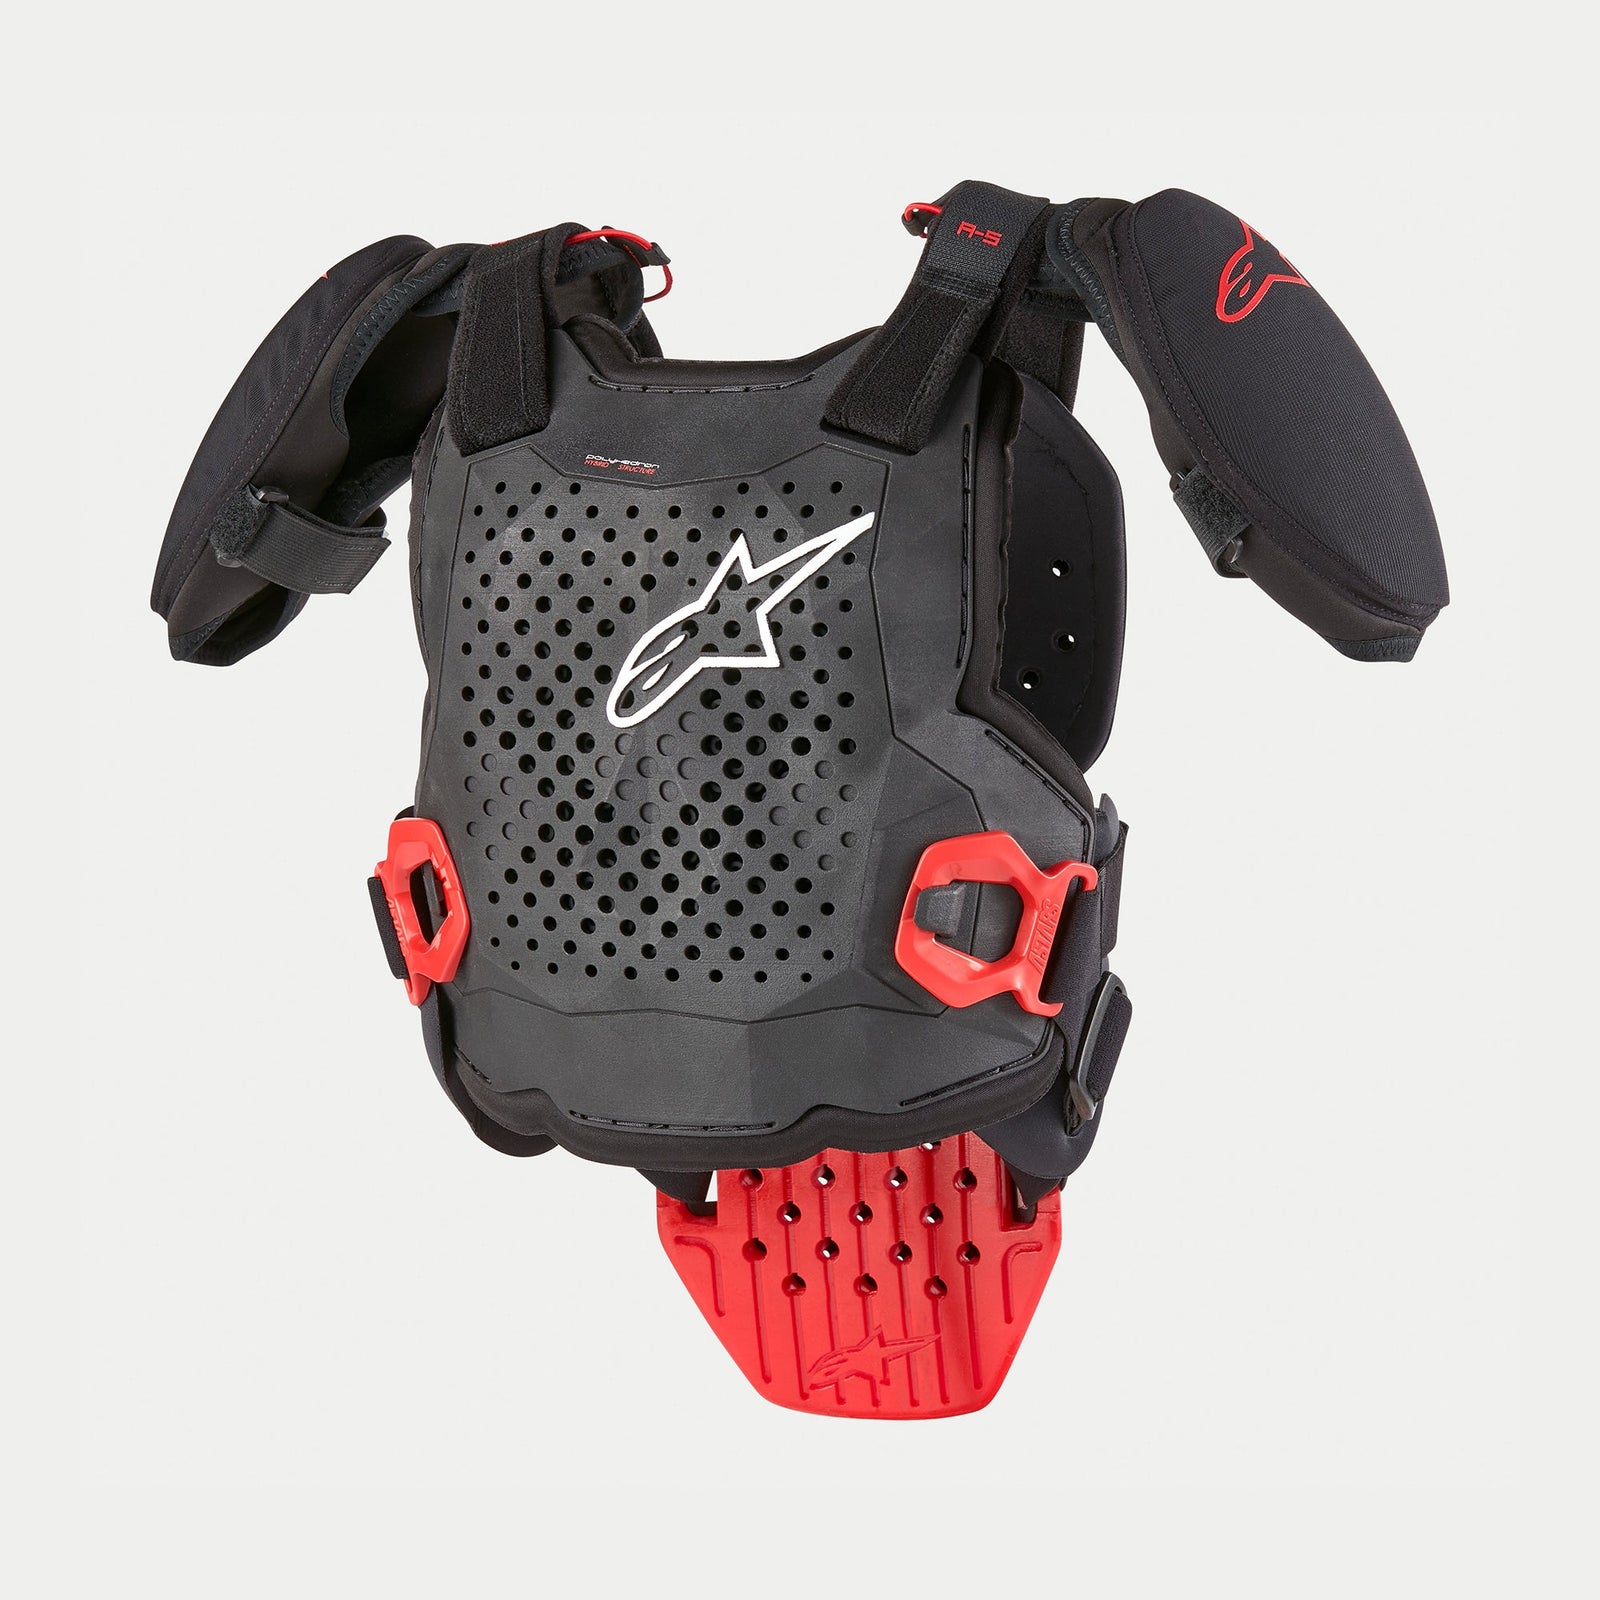 A-5 S Chest Protector - Jugendliche